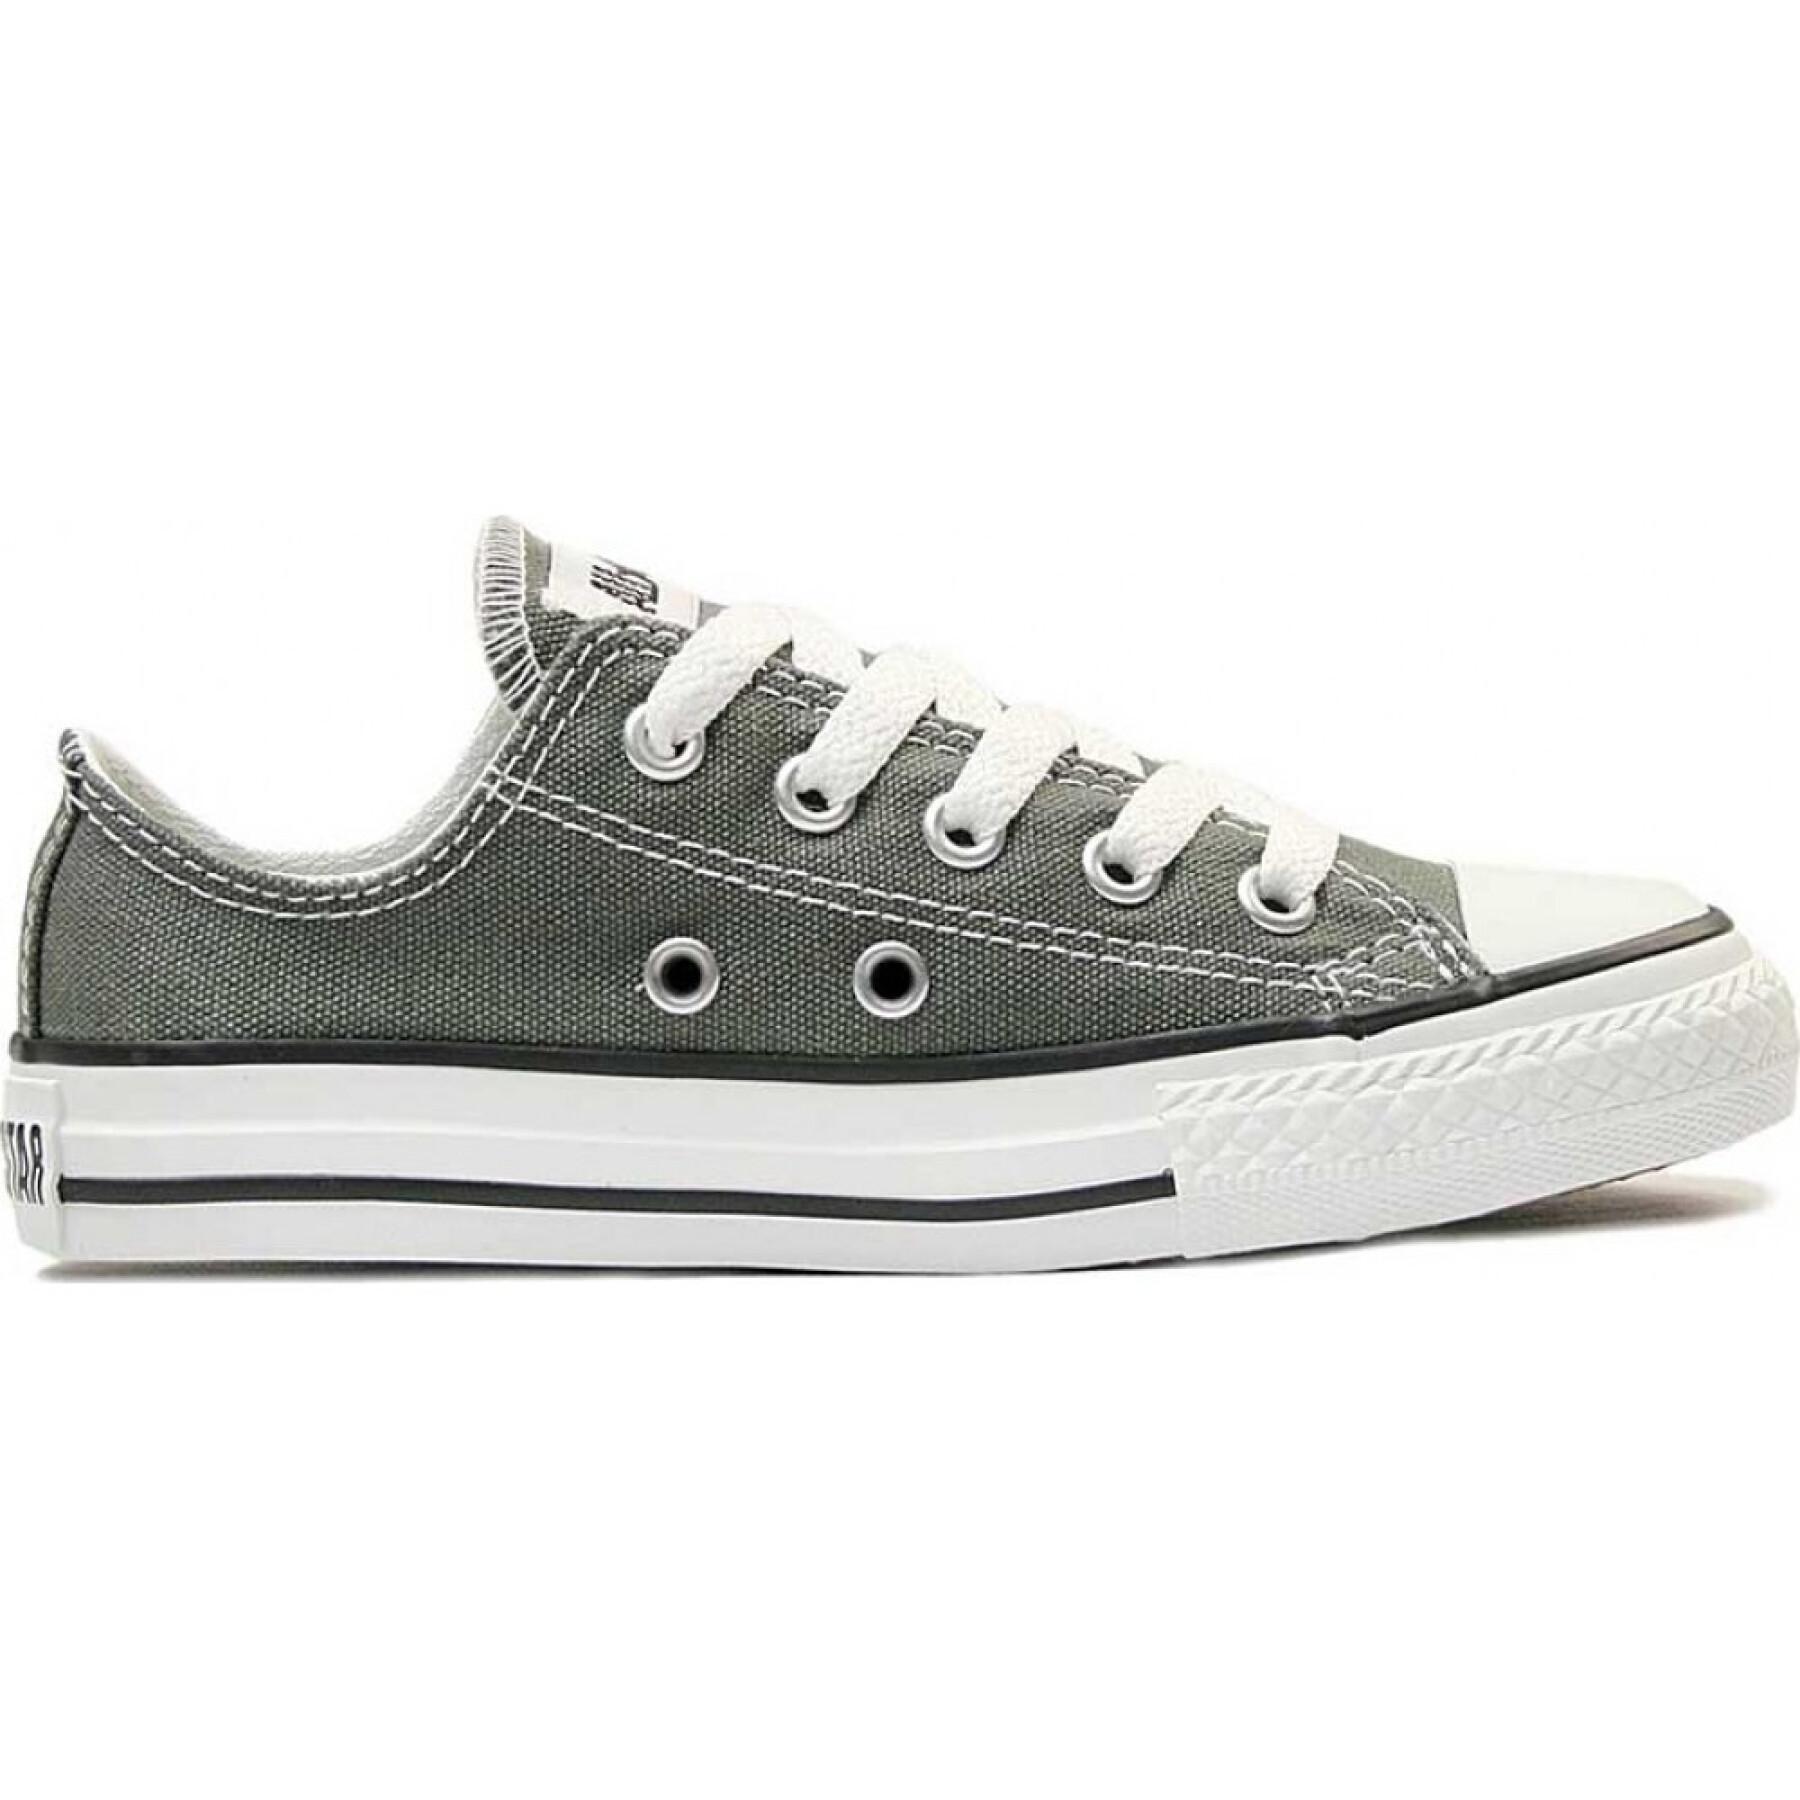 Children's sneakers Converse Chuck Taylor